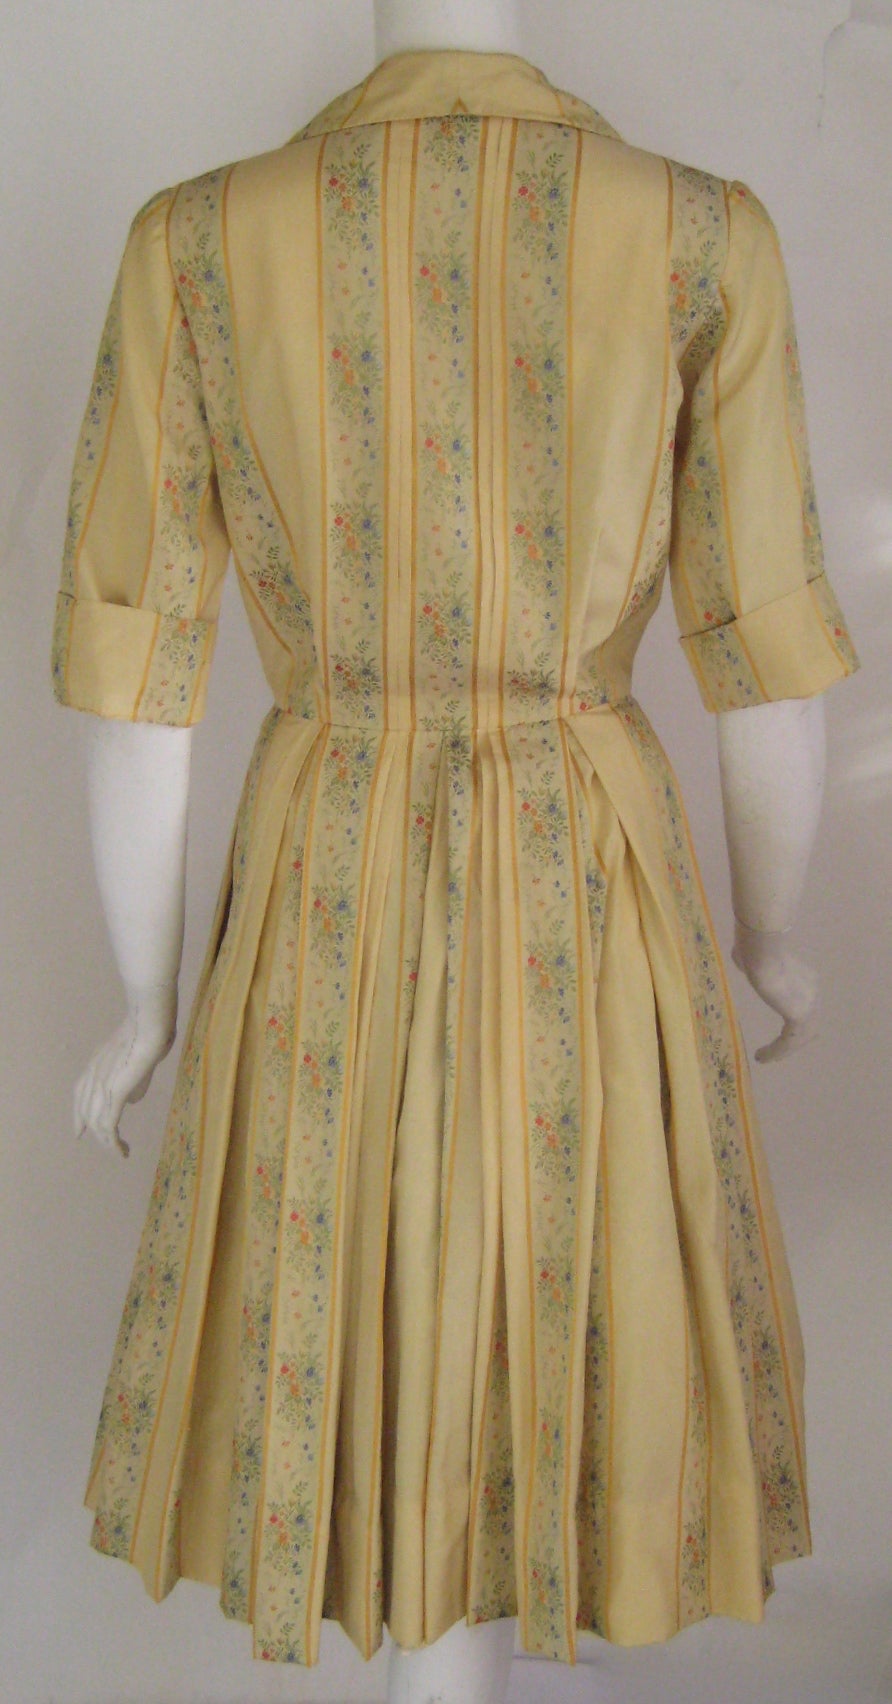 1950s Holly Hoelscher Pale Yellow Silk California Shirt Dress In Excellent Condition For Sale In Chicago, IL